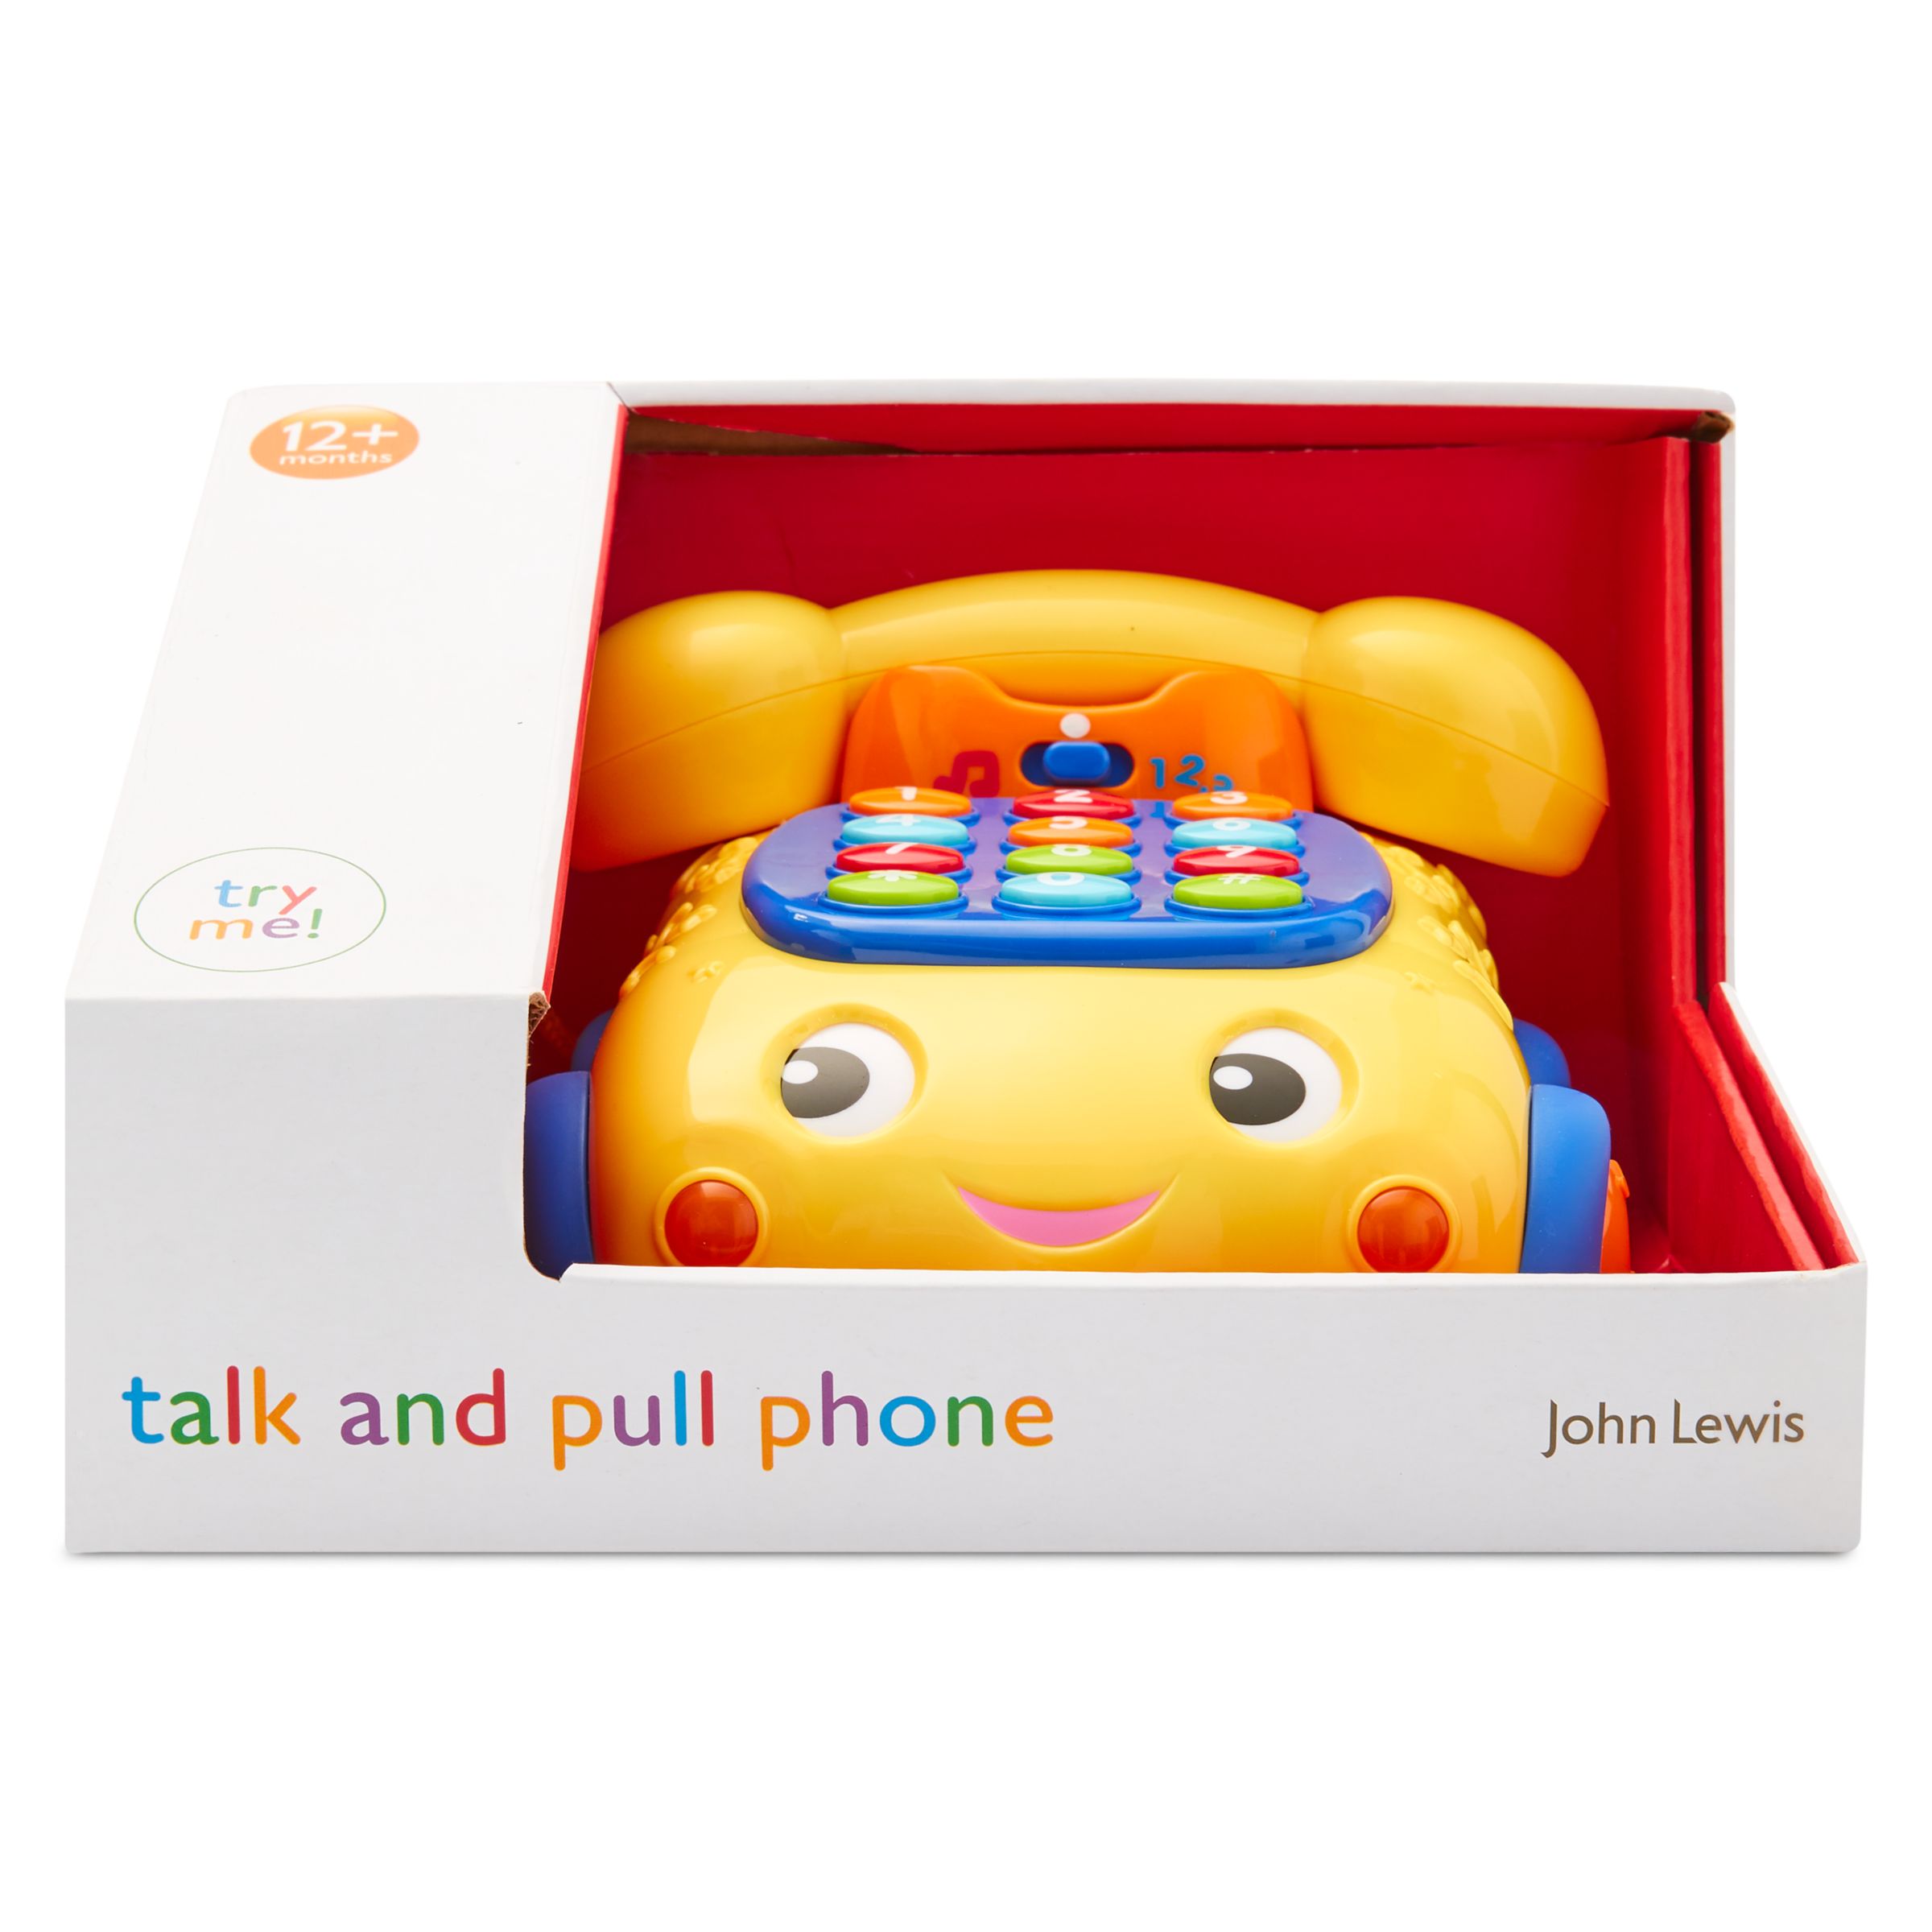 john lewis toys and games